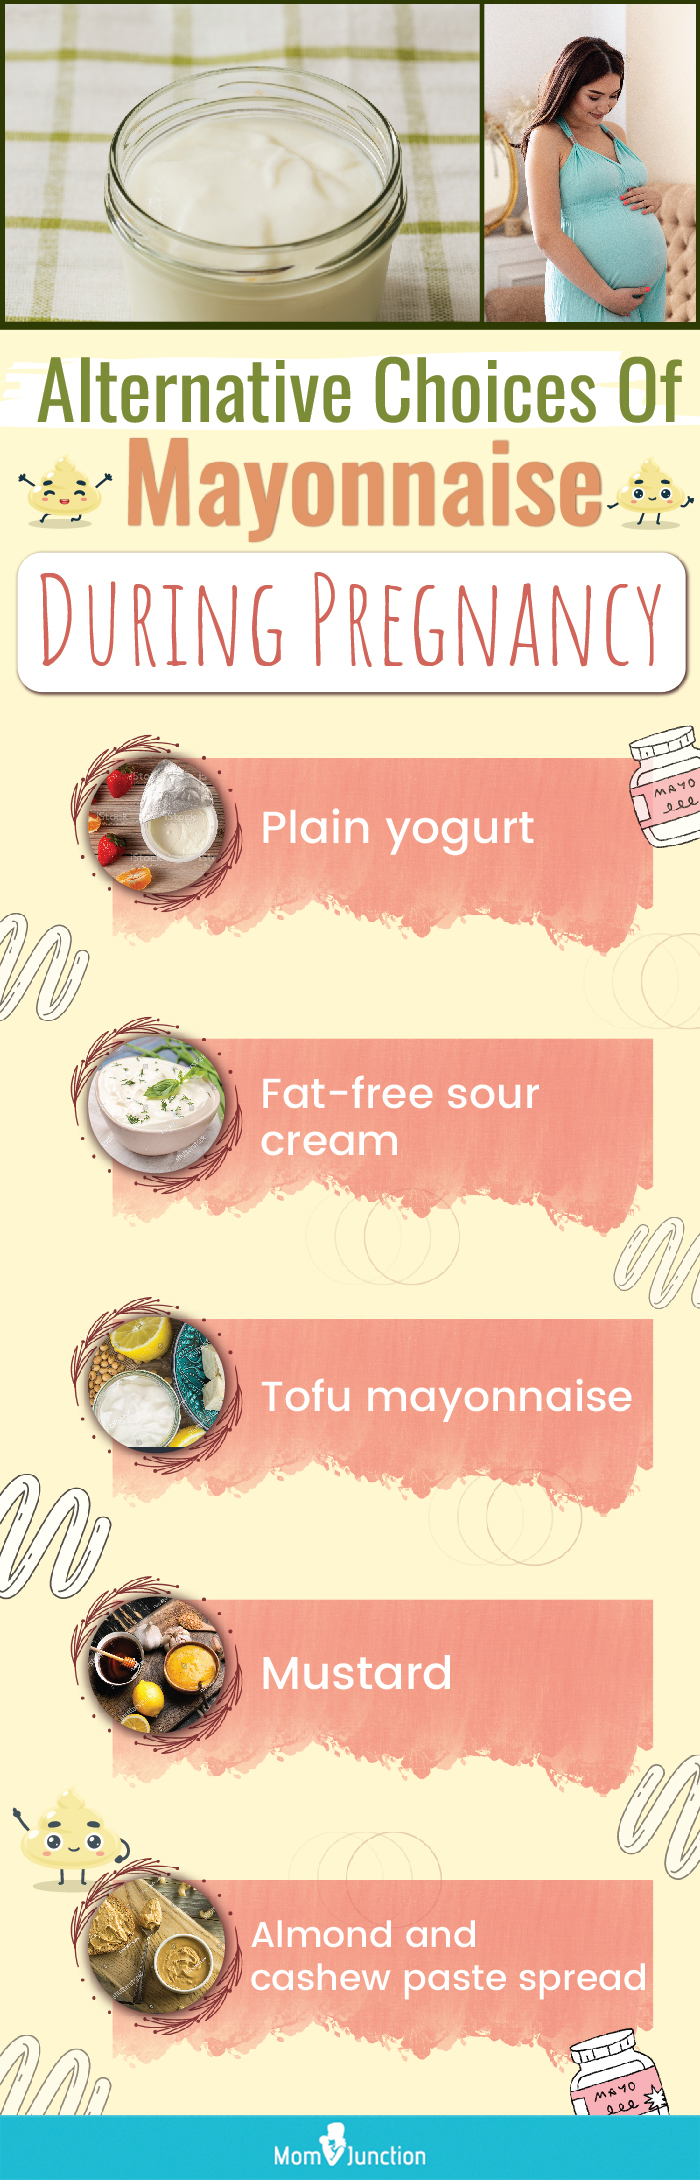 alternatives choices mayonnaise during pregnancy (infographic)